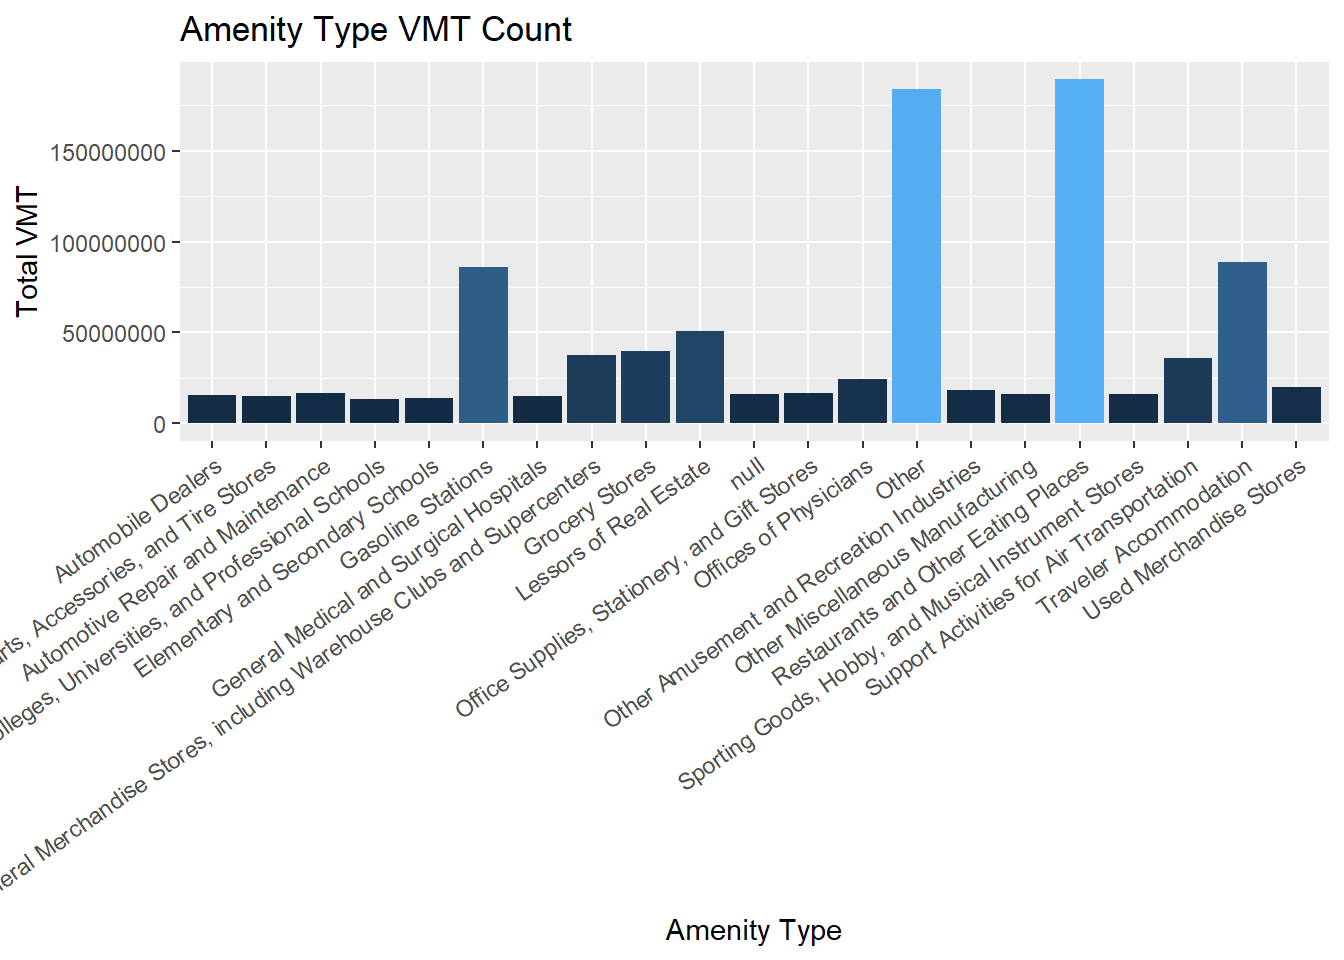 Non-commute VMT by type of amenity. Source: Safegraph 2018.